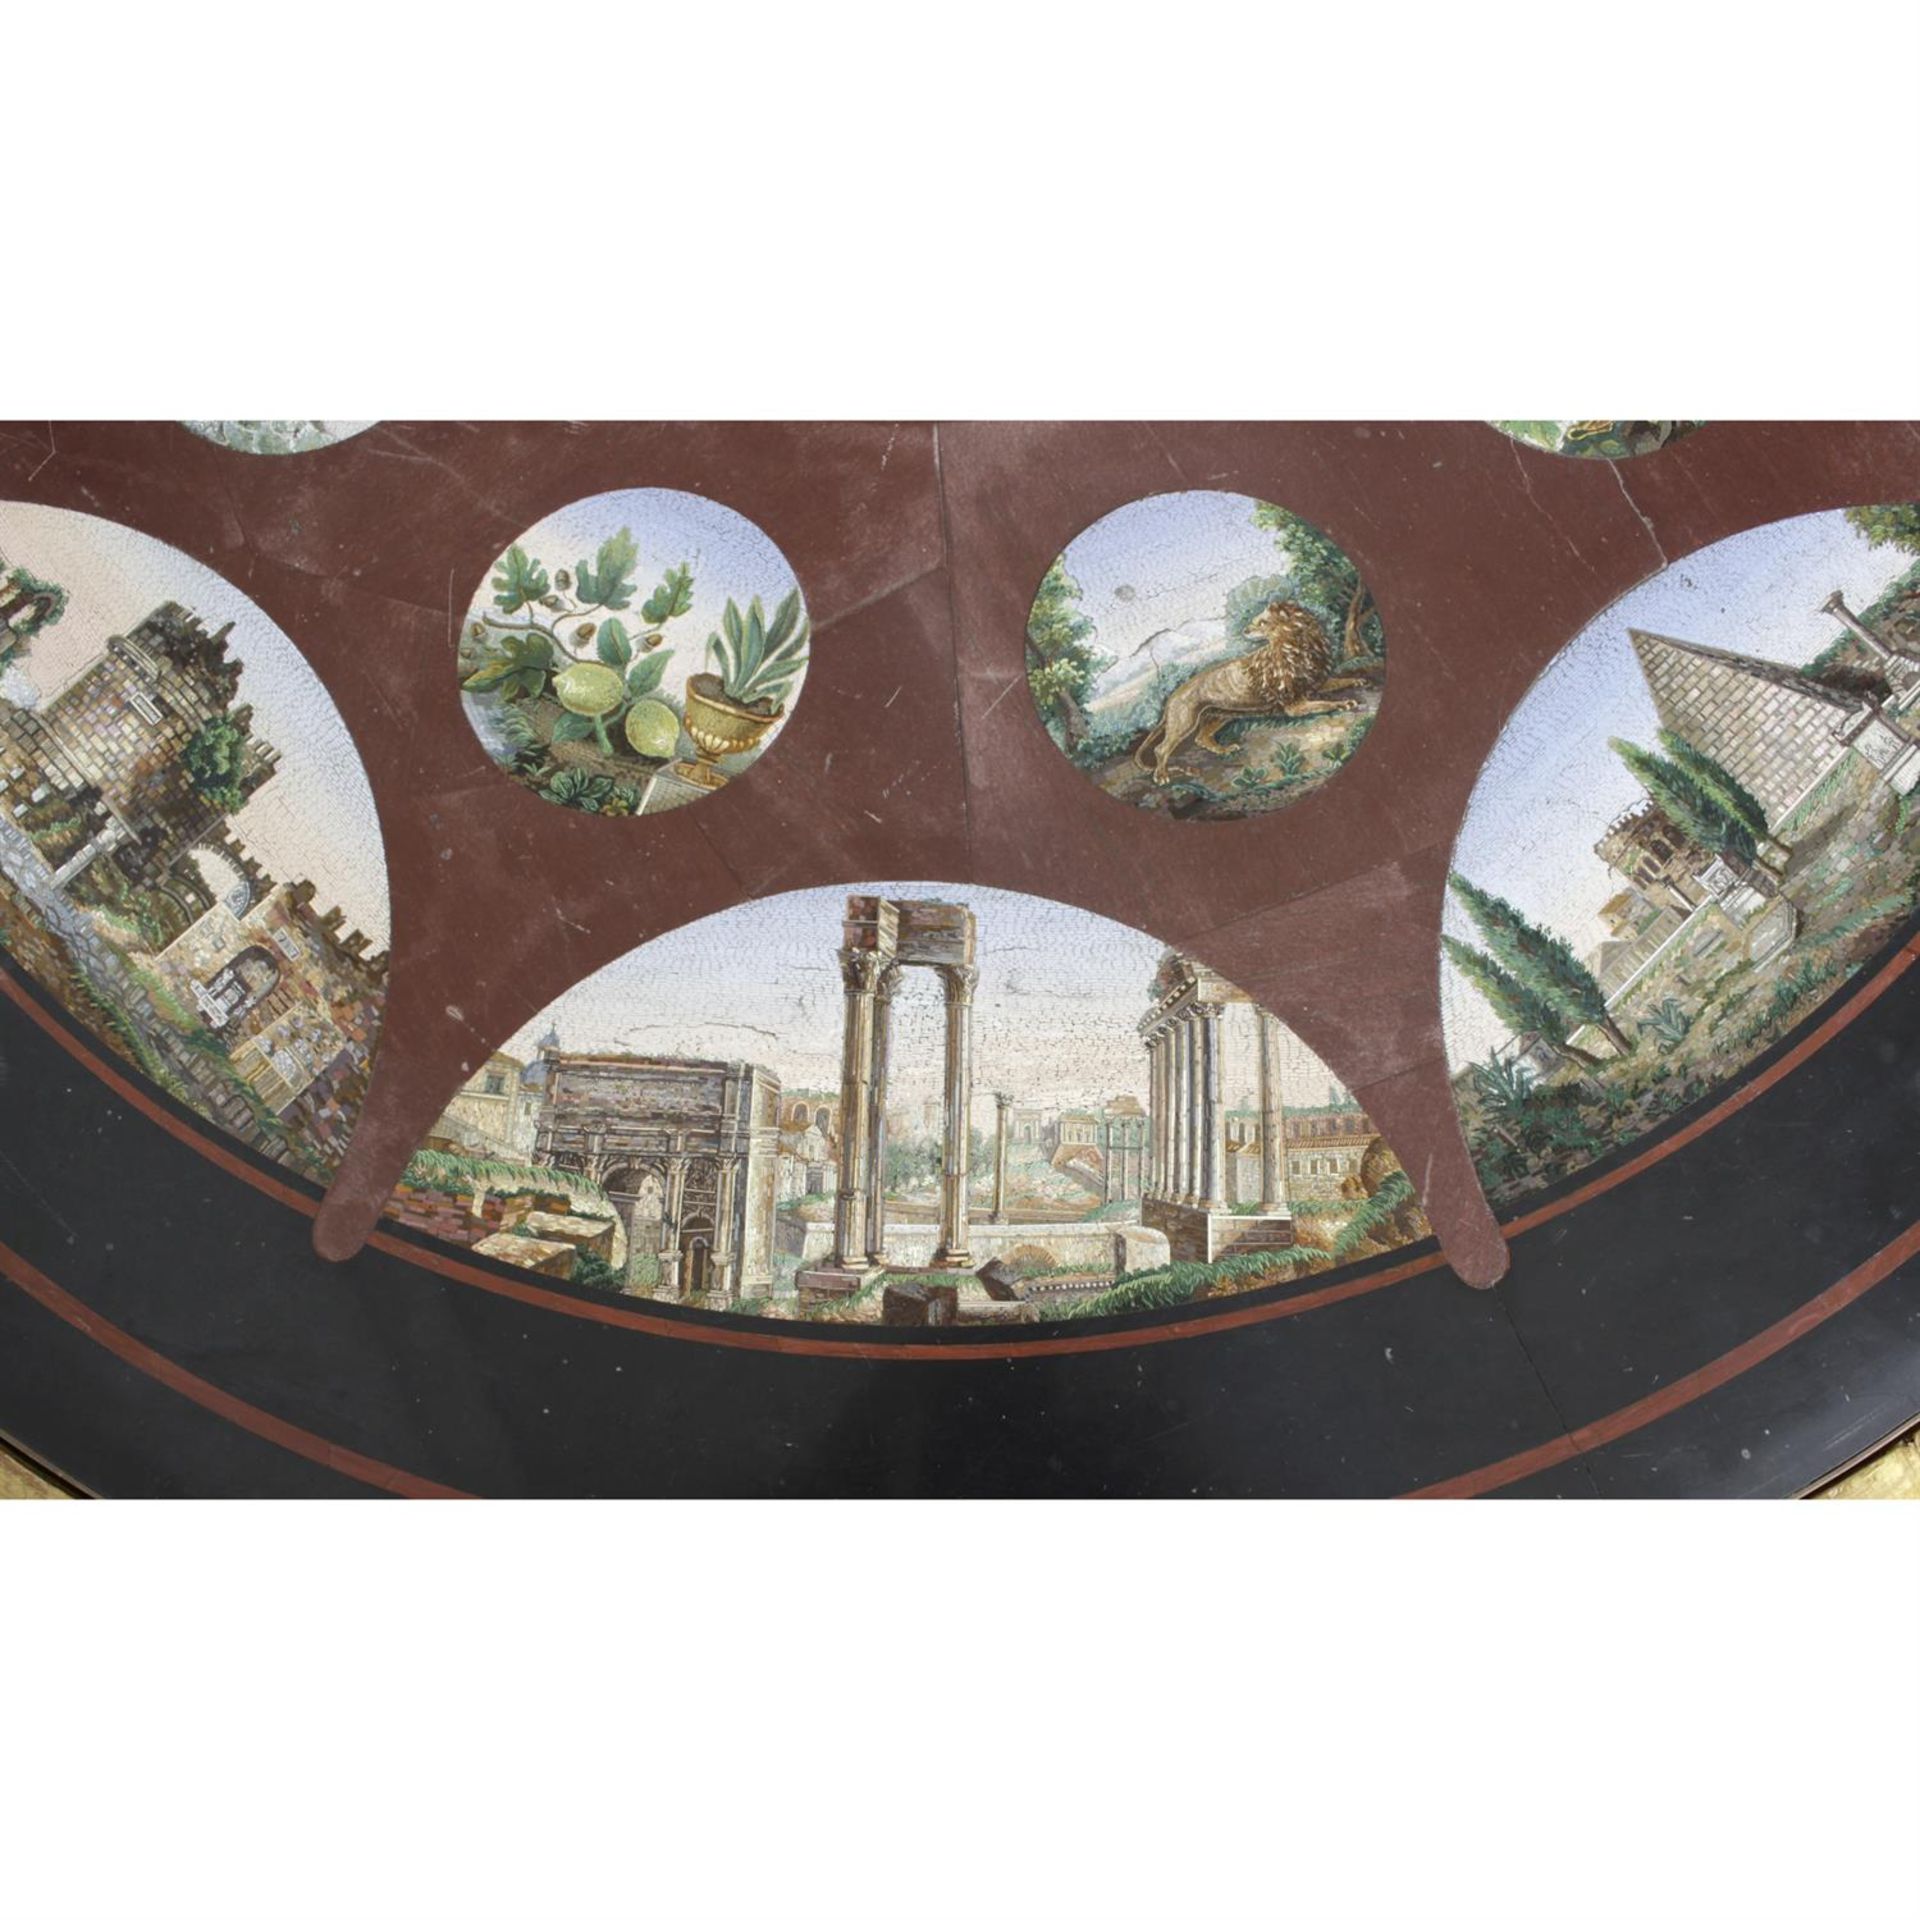 A 19th century Italian micromosaic table. - Image 5 of 26